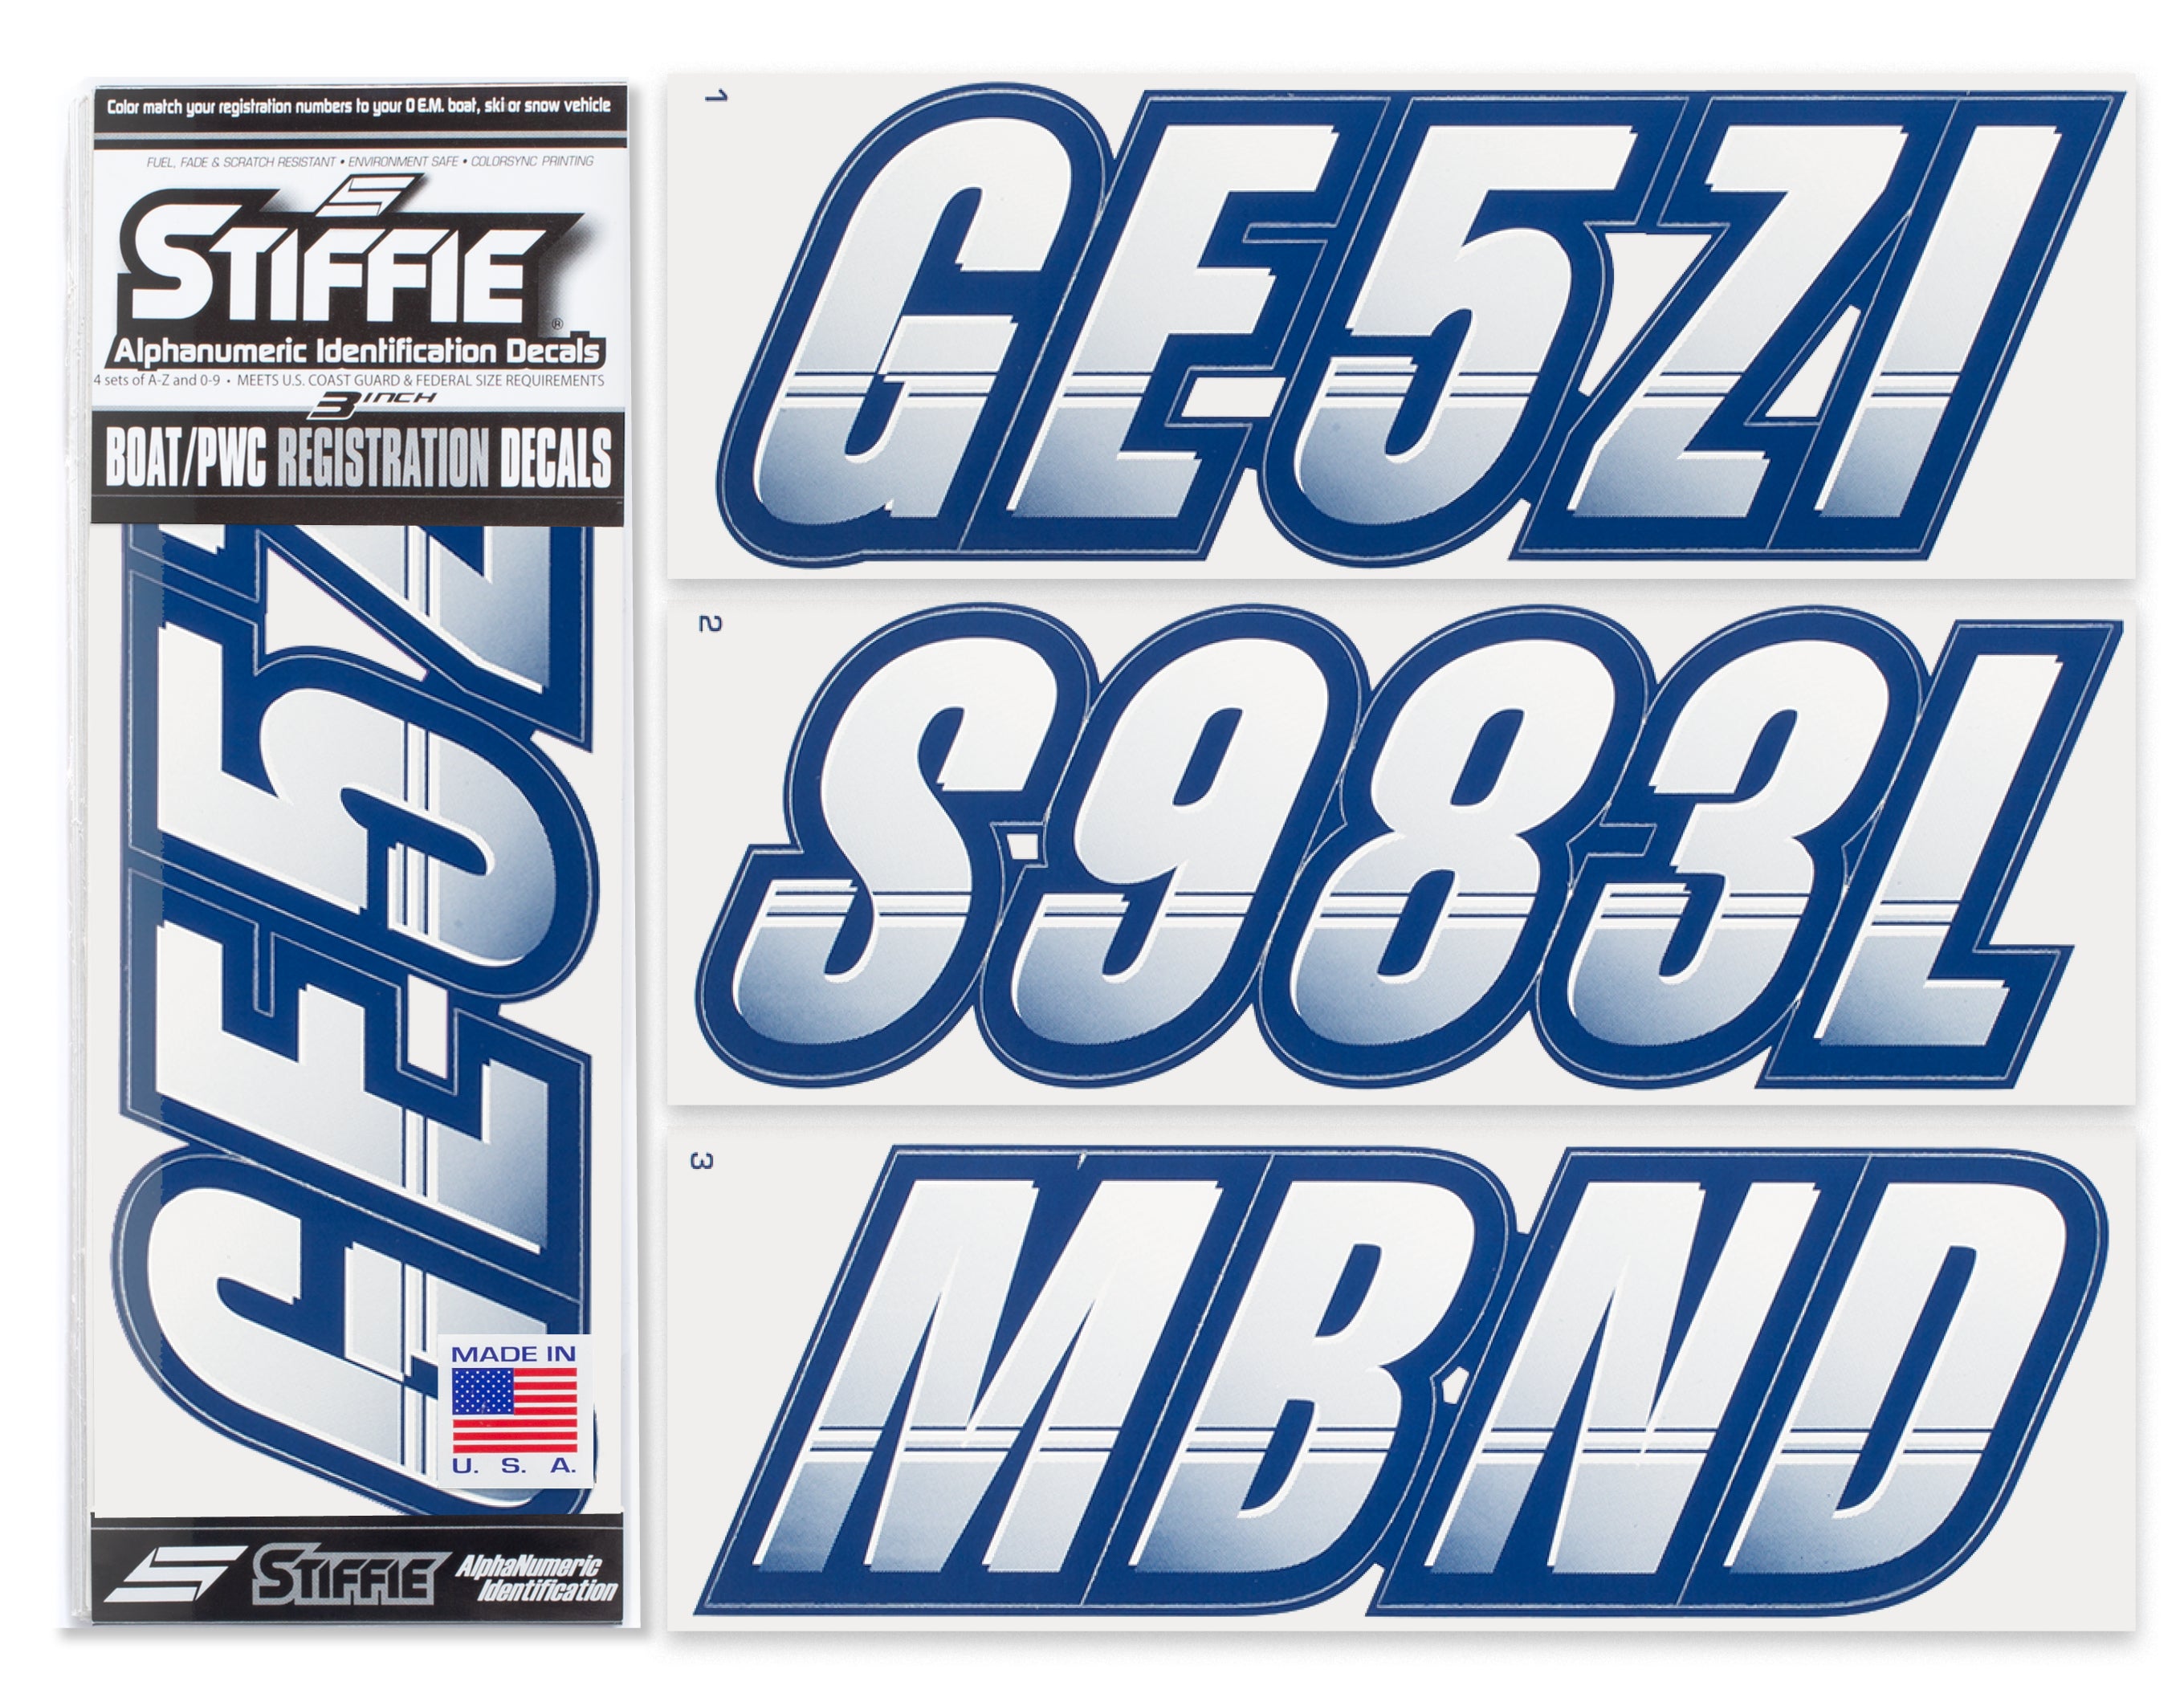 STIFFIE Techtron White/Navy 3" Alpha-Numeric Registration Identification Numbers Stickers Decals for Boats & Personal Watercraft